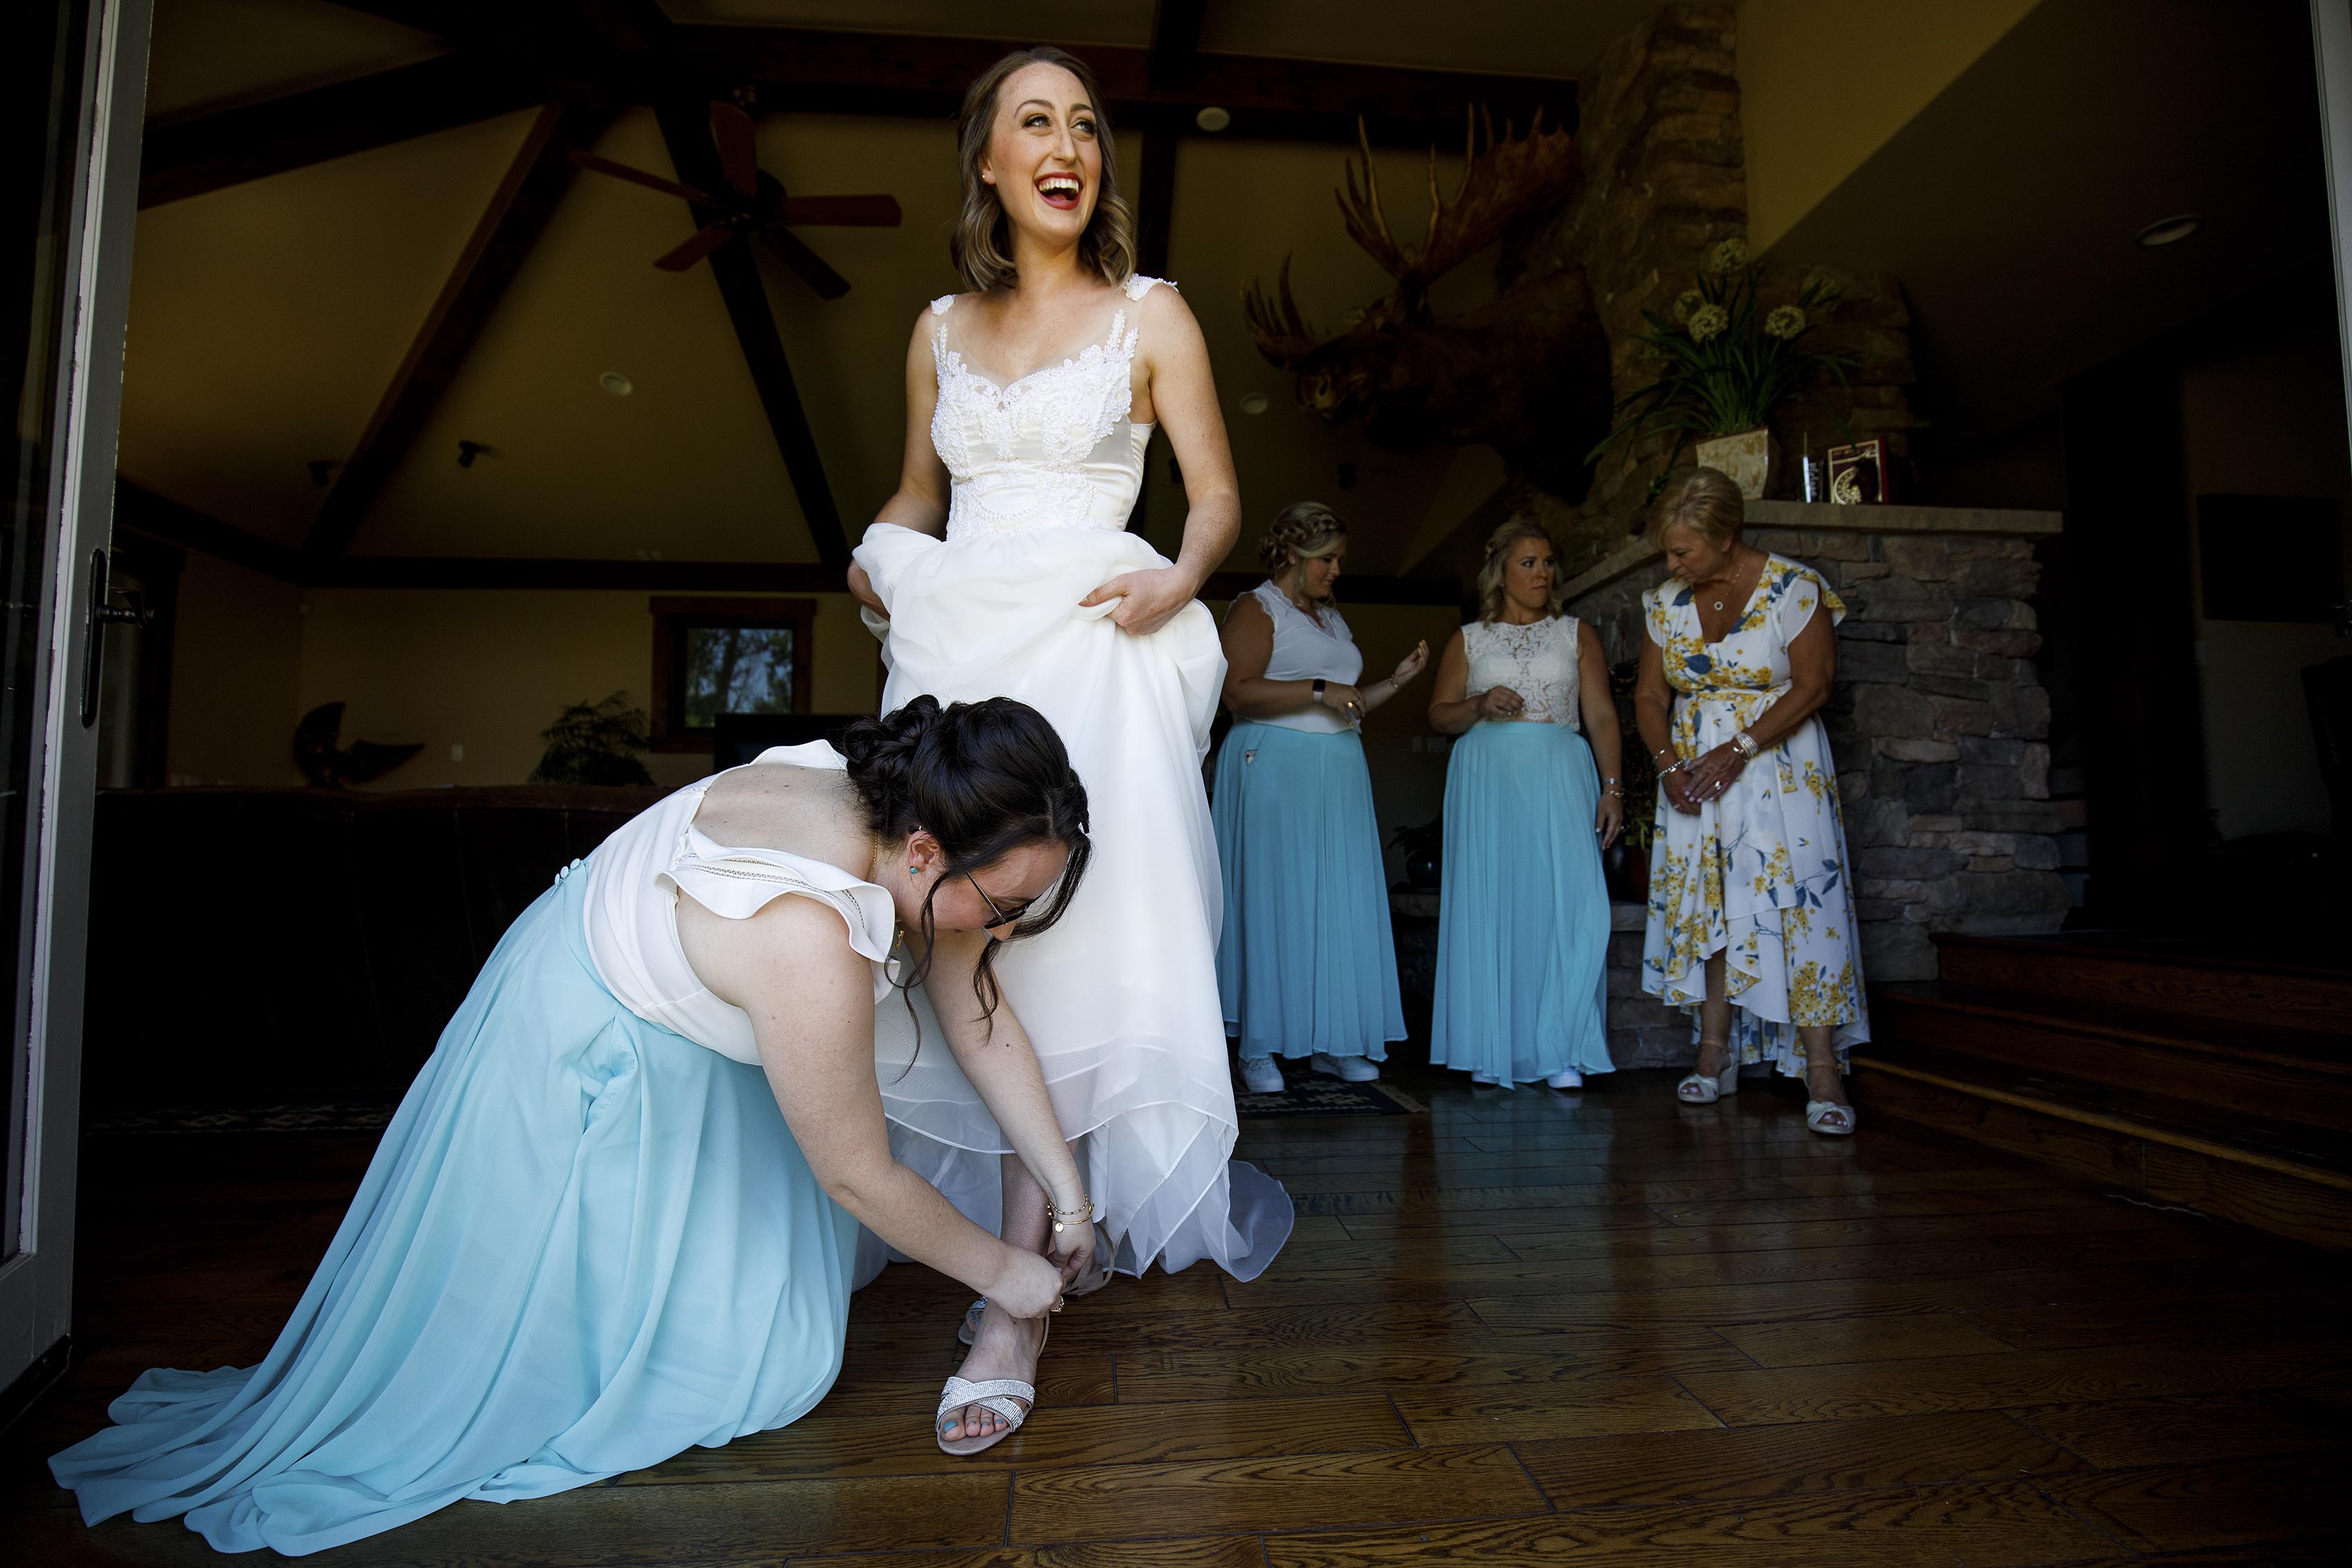 The bride laughs while getting dressed before her wedding at 4 Eagle Ranch in Wolcott, CO